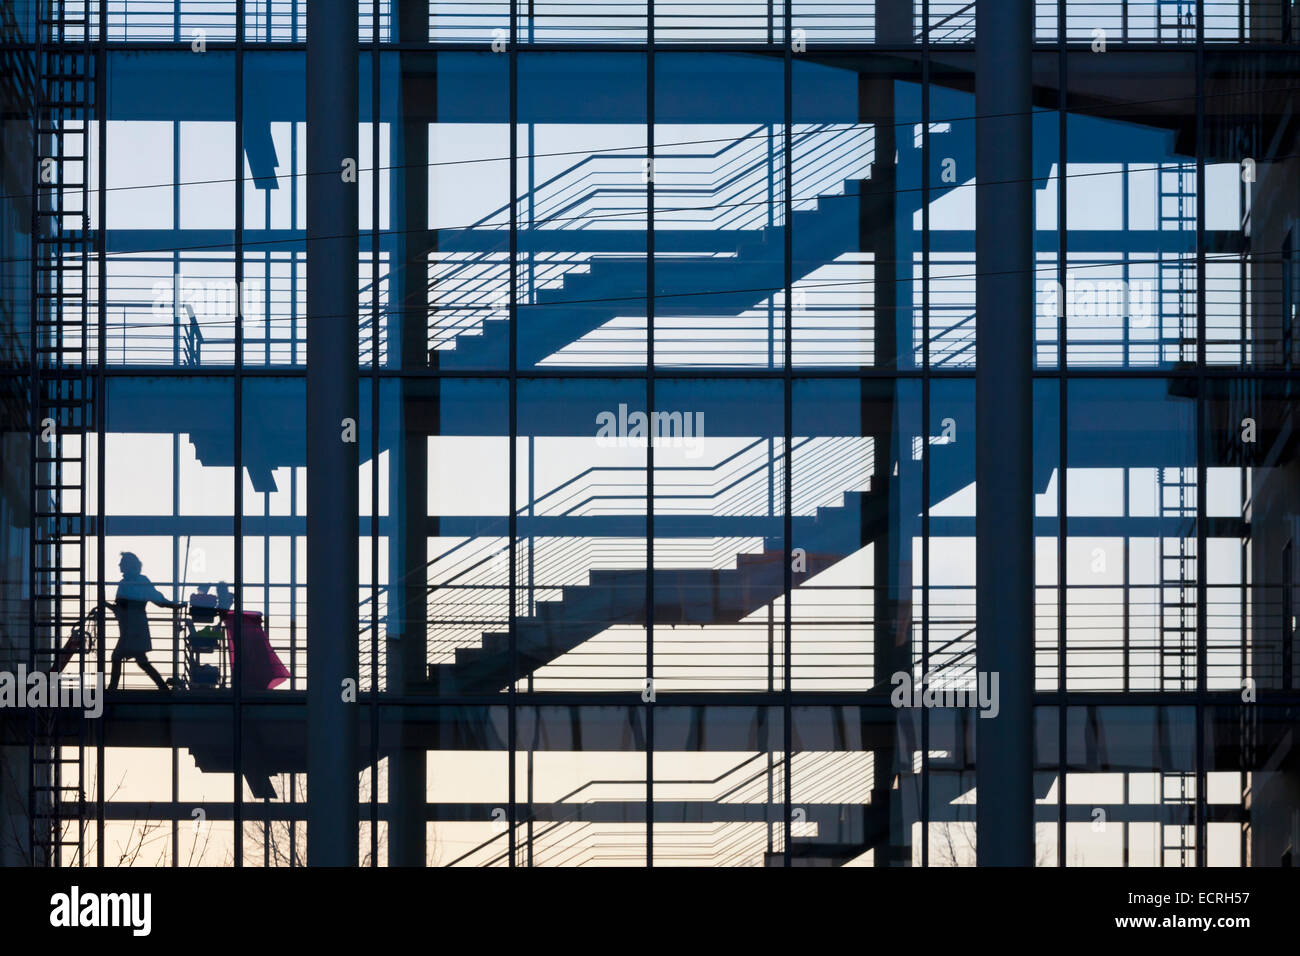 SILHOUETTE OF A CHARWOMAN, STAIRCASE, OFFICE BLOCK, STUTTGART, BADEN-WURTTEMBERG, GERMANY Stock Photo